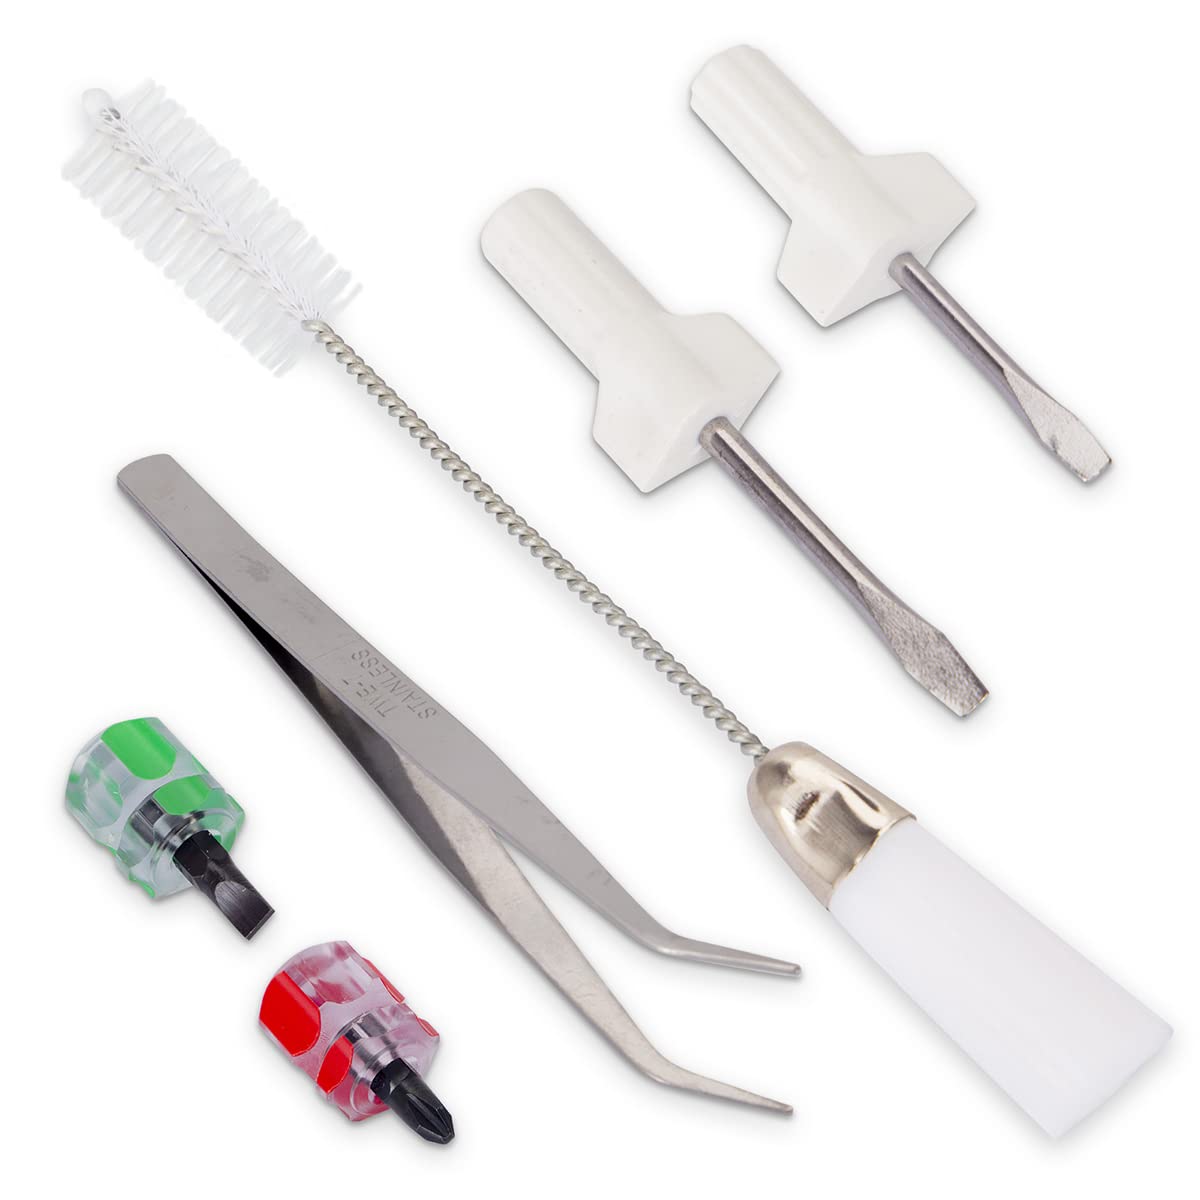 7 Piece Sewing Machine Cleaning Kit Include Tweezers India